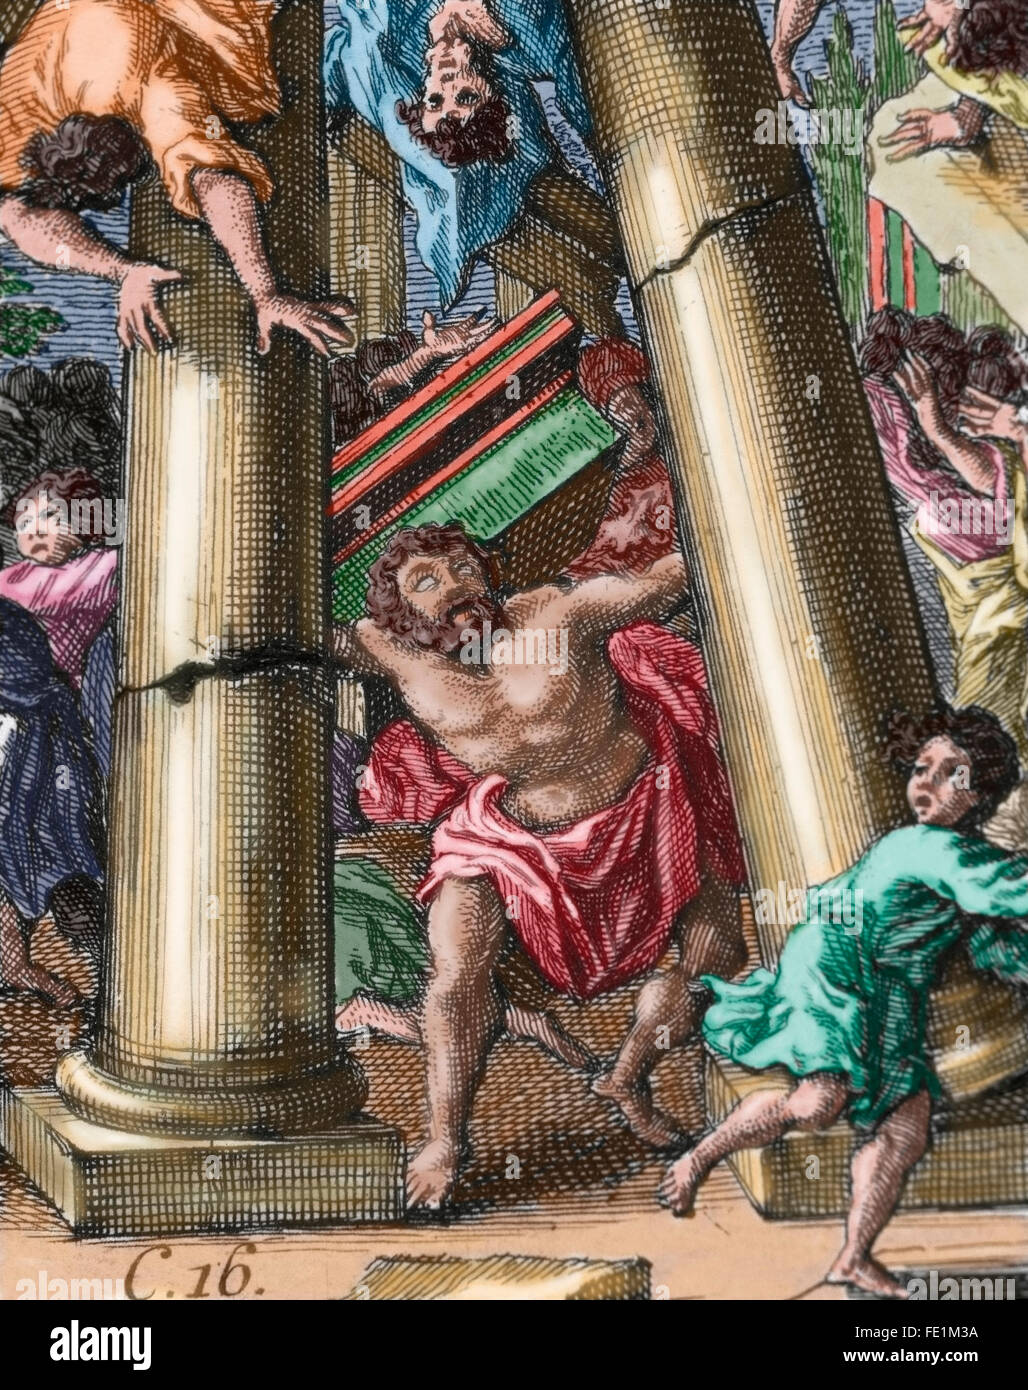 Samson destroying the temple of Dagon. Book of Judges. Chapter 16. Engraving. Colored. Stock Photo